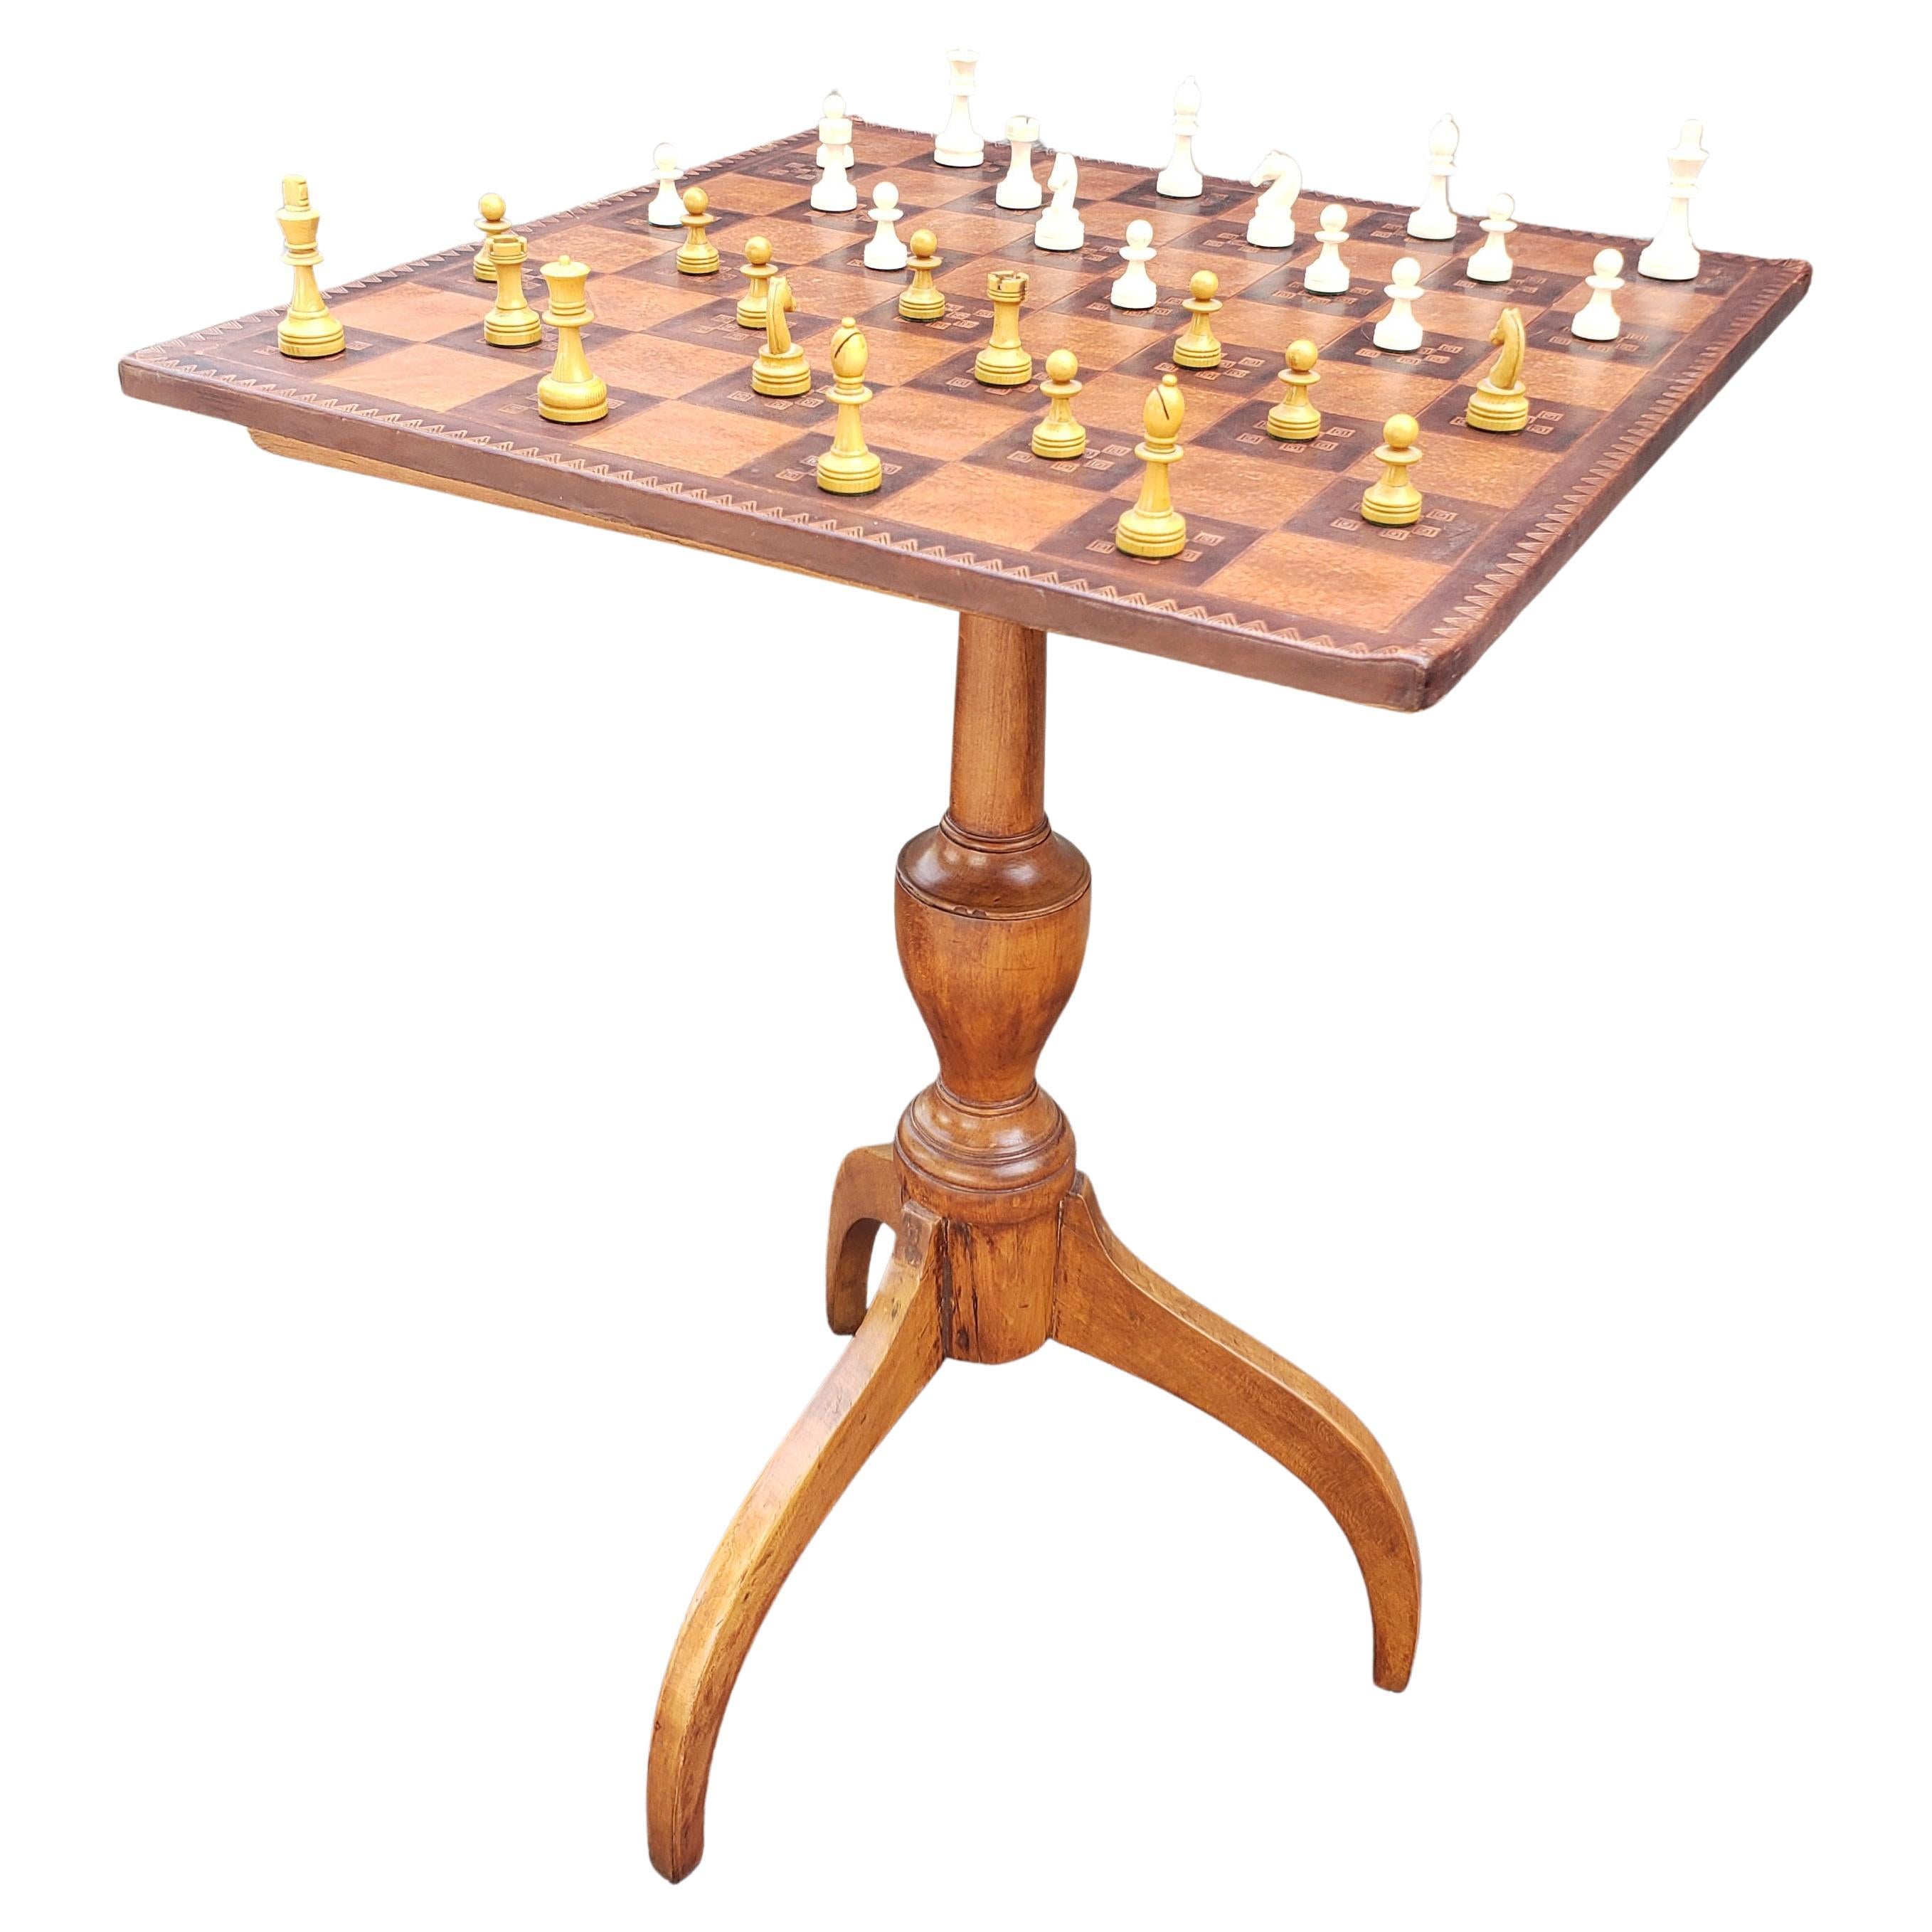 A 19th century victorian Spider Legs Maple Table and Leather Top Chess Board and Pieces Set in good antique and condition. Great has great patina and comes with newer, actual leather chess board and pieces. Tbale measures 16.5